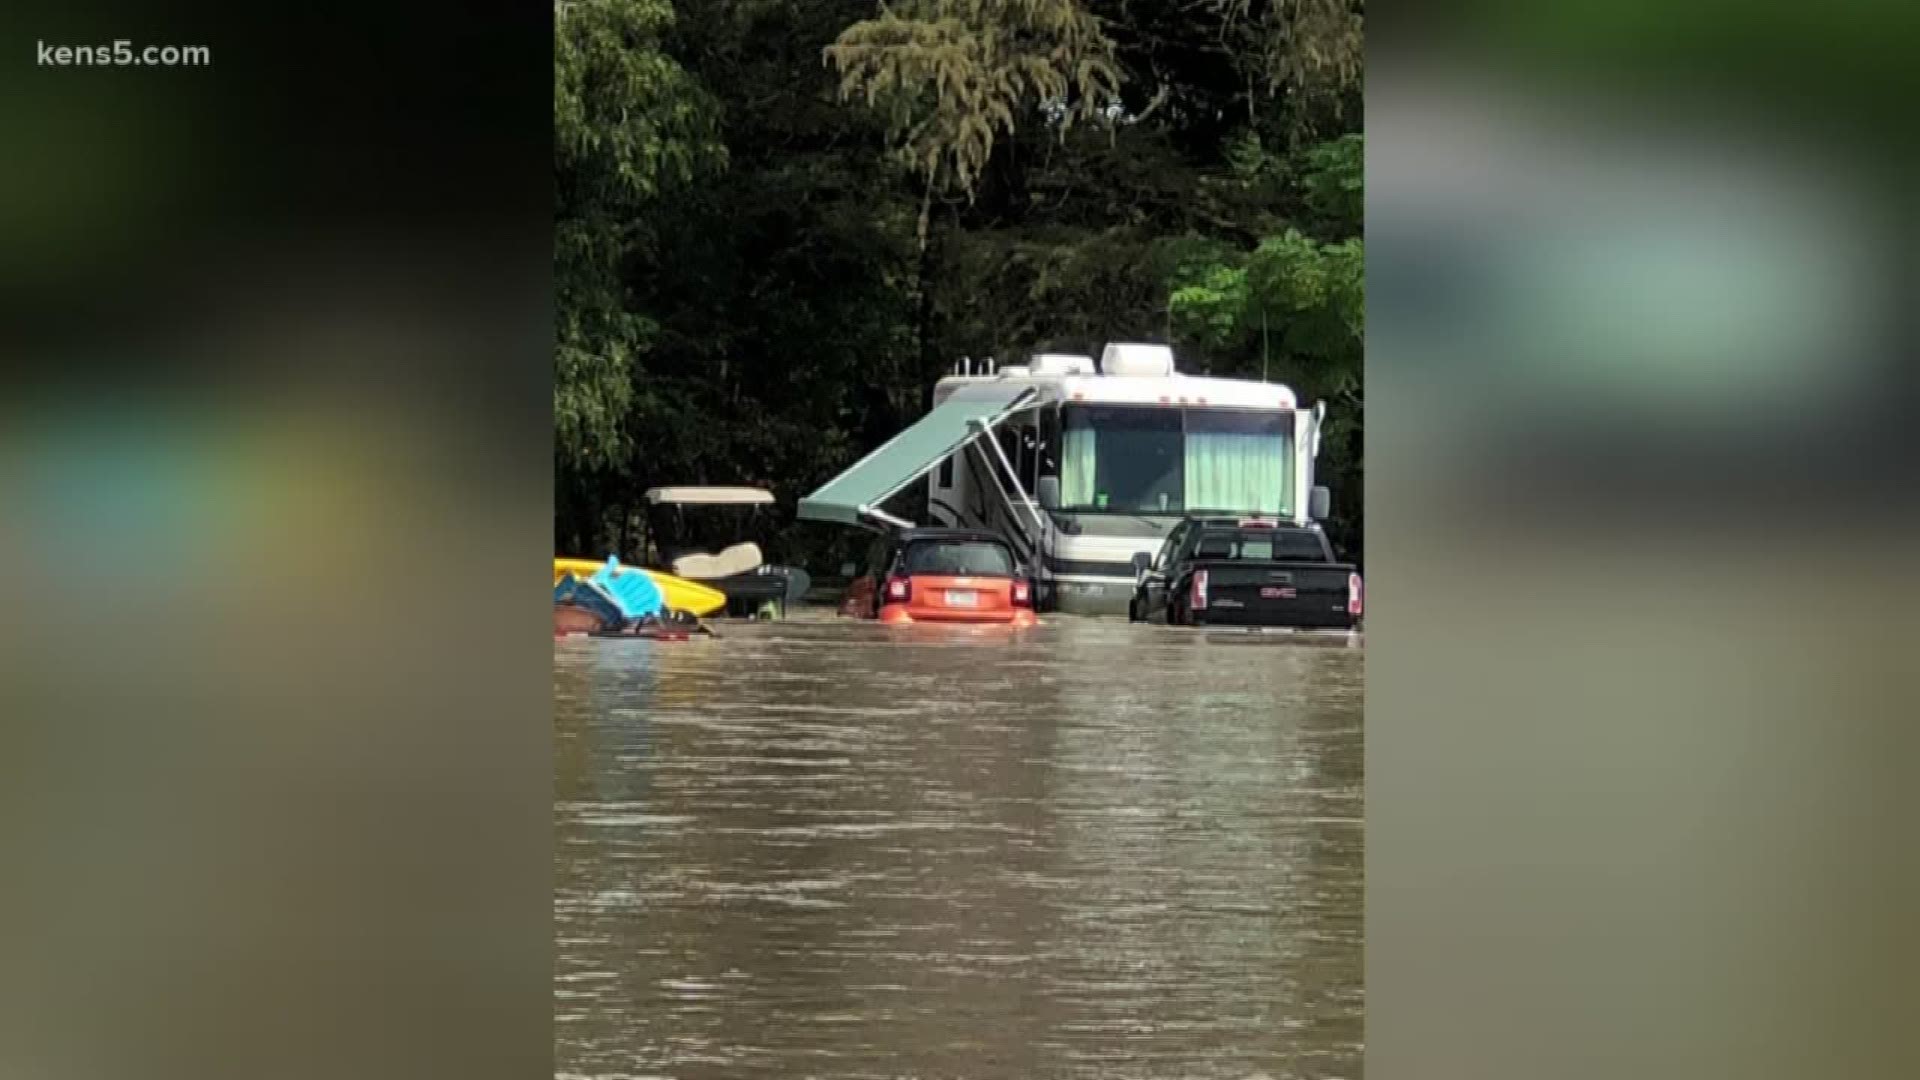 The Medina River rose several feet in a matter of hours in La Coste, just a few miles southeast of Castroville. Eyewitness News reporter Adi Guajardo spoke with one person who says he lost everything and he's not alone.